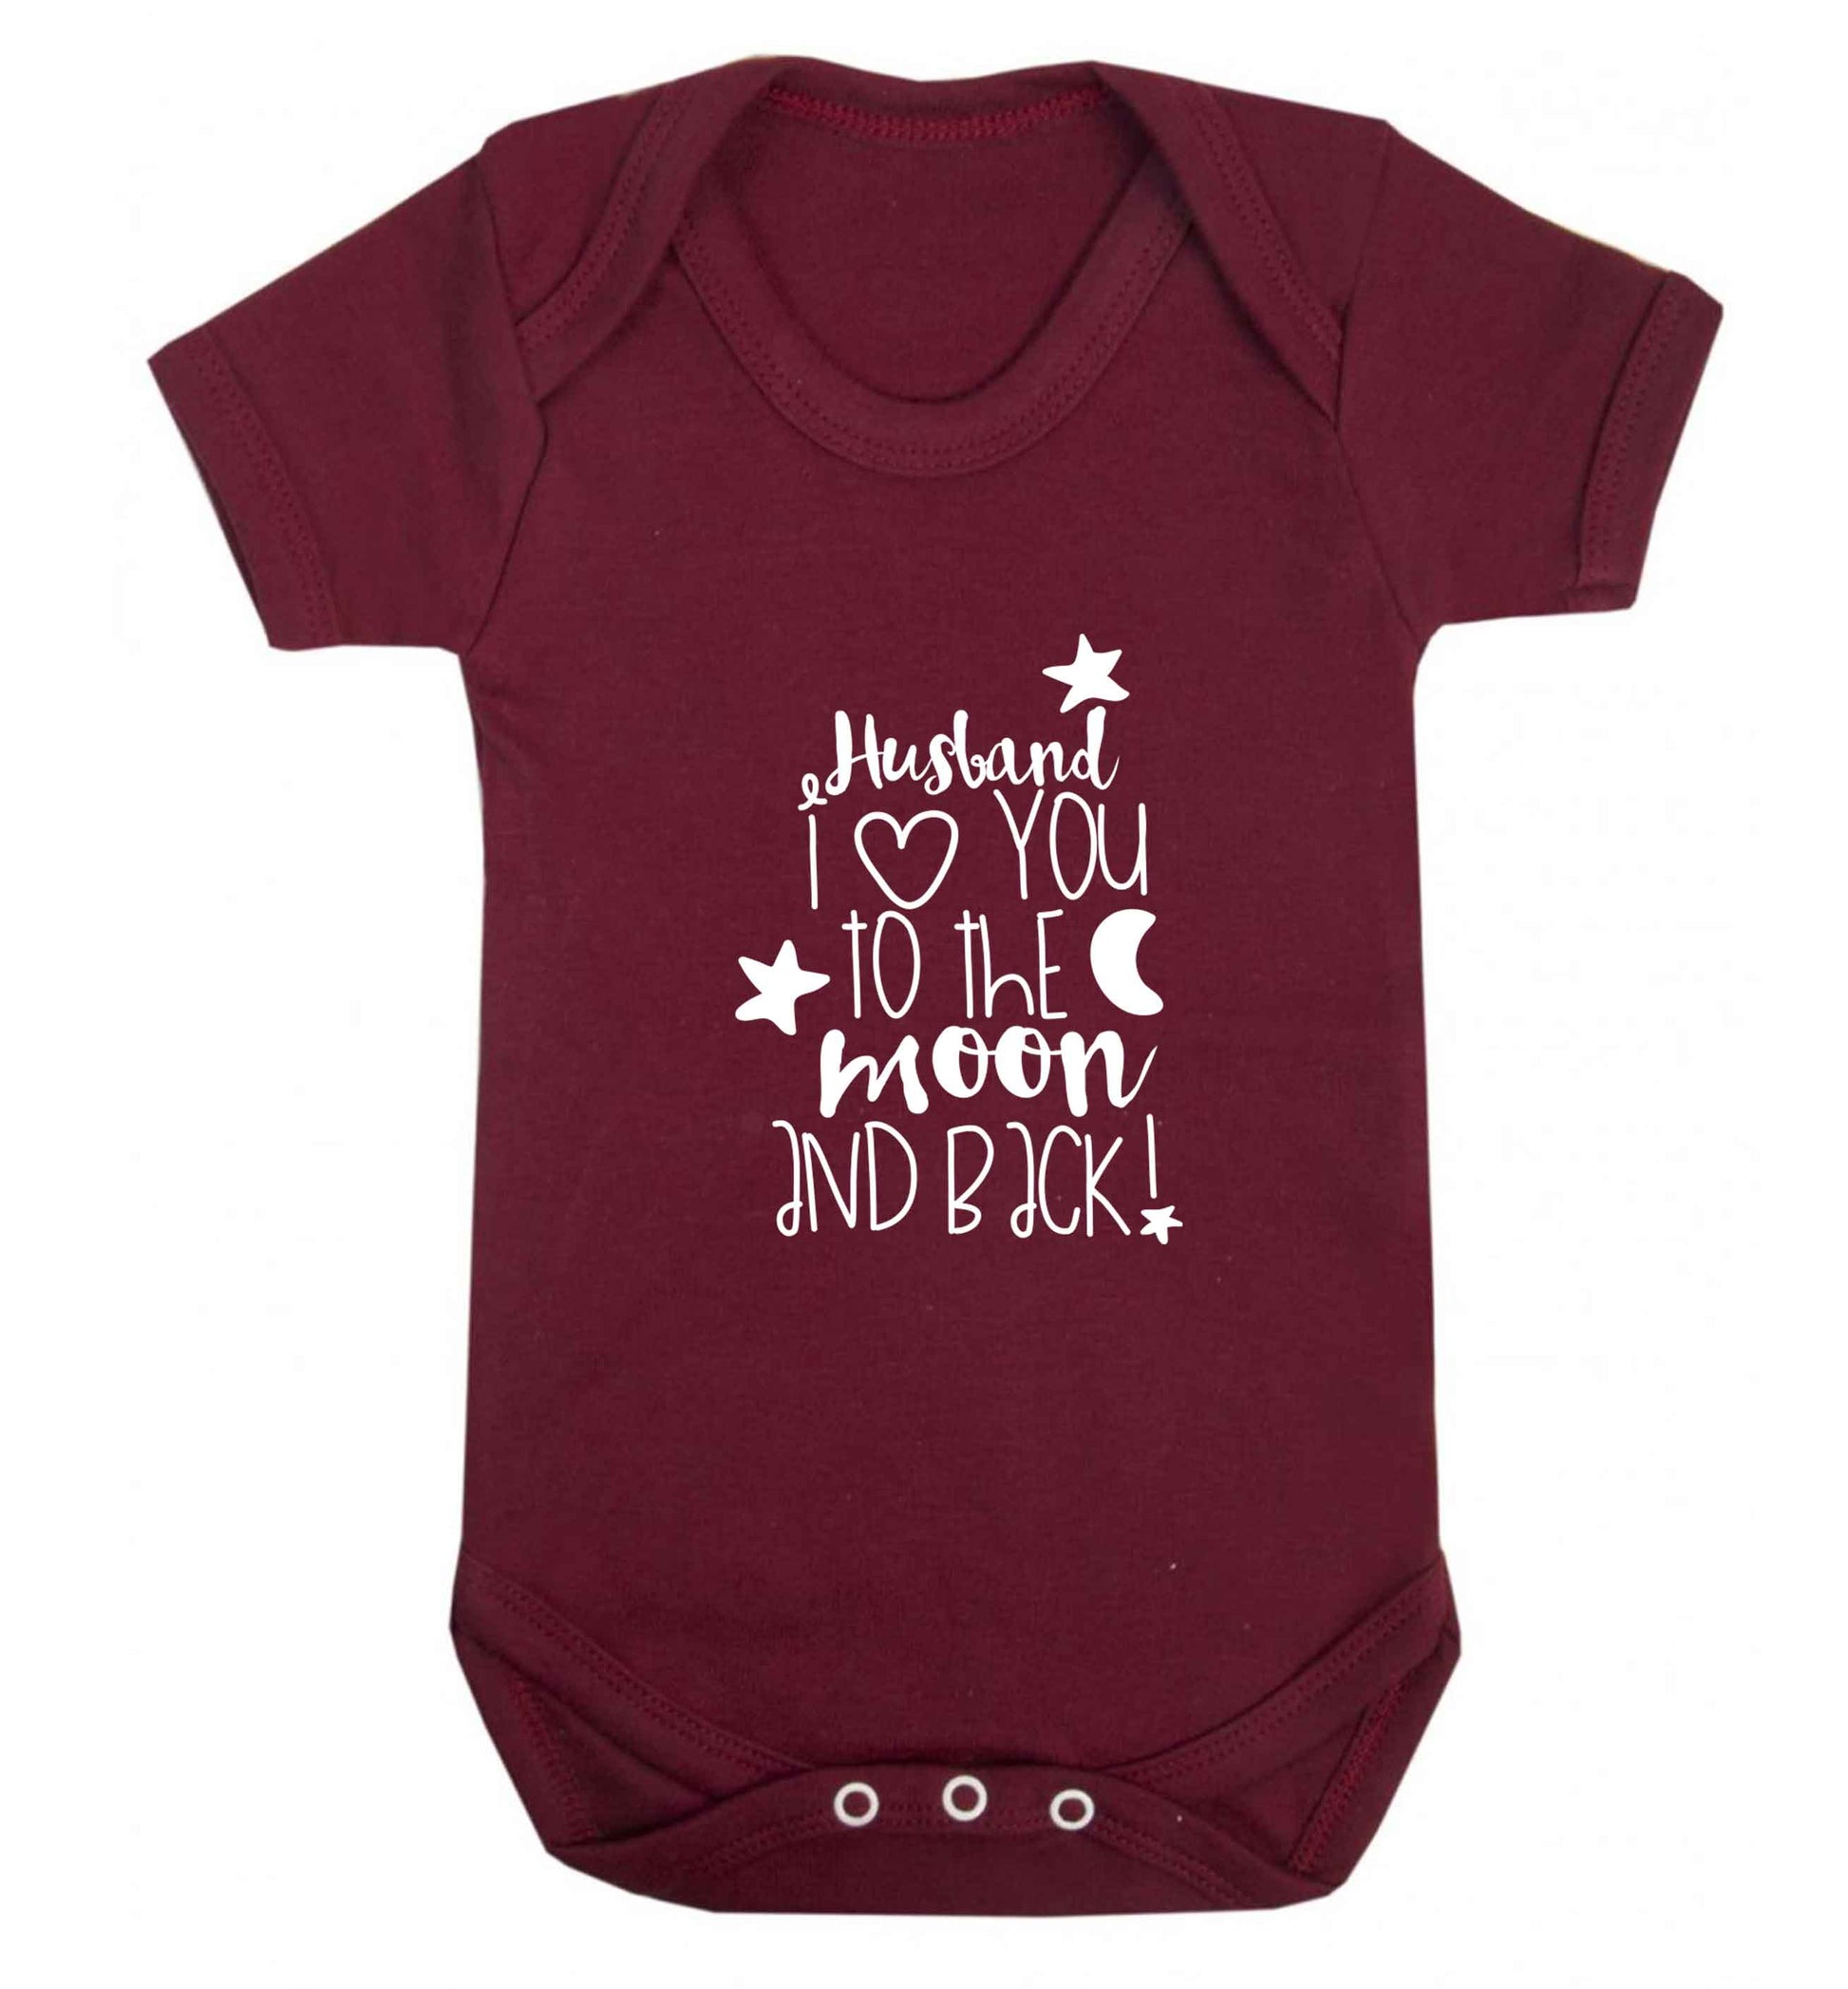 Husband I love you to the moon and back baby vest maroon 18-24 months